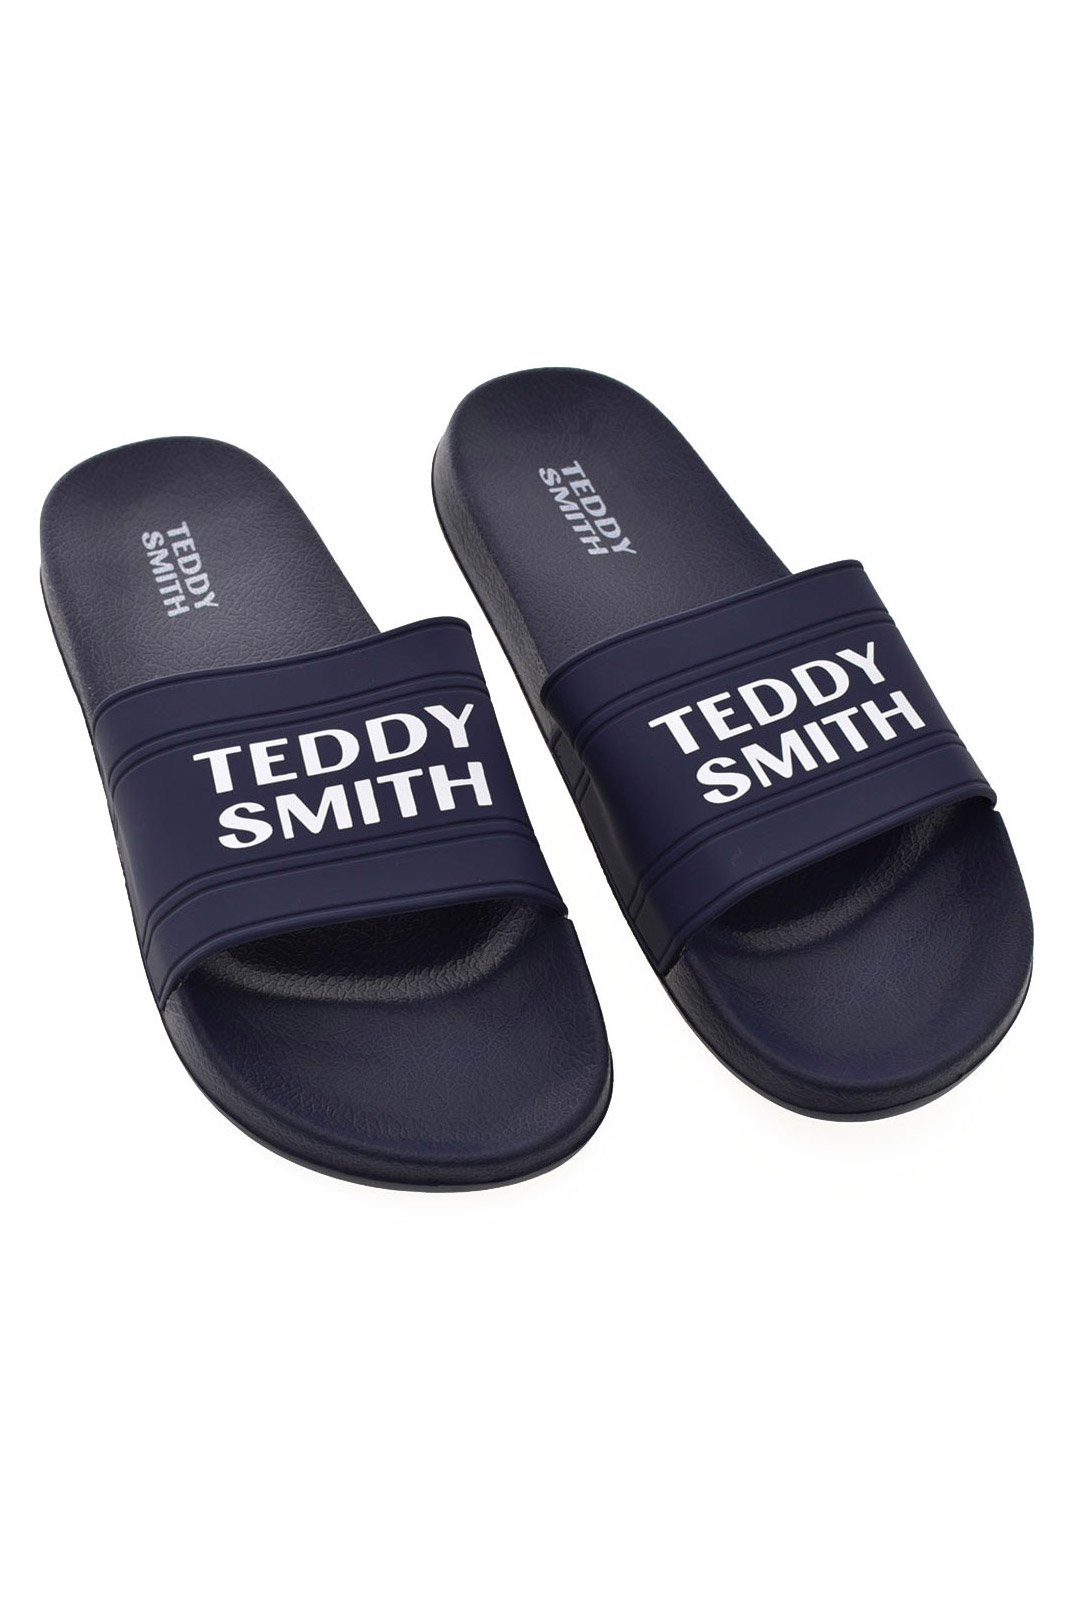 Chaussures   Teddy smith 71744 NAVY